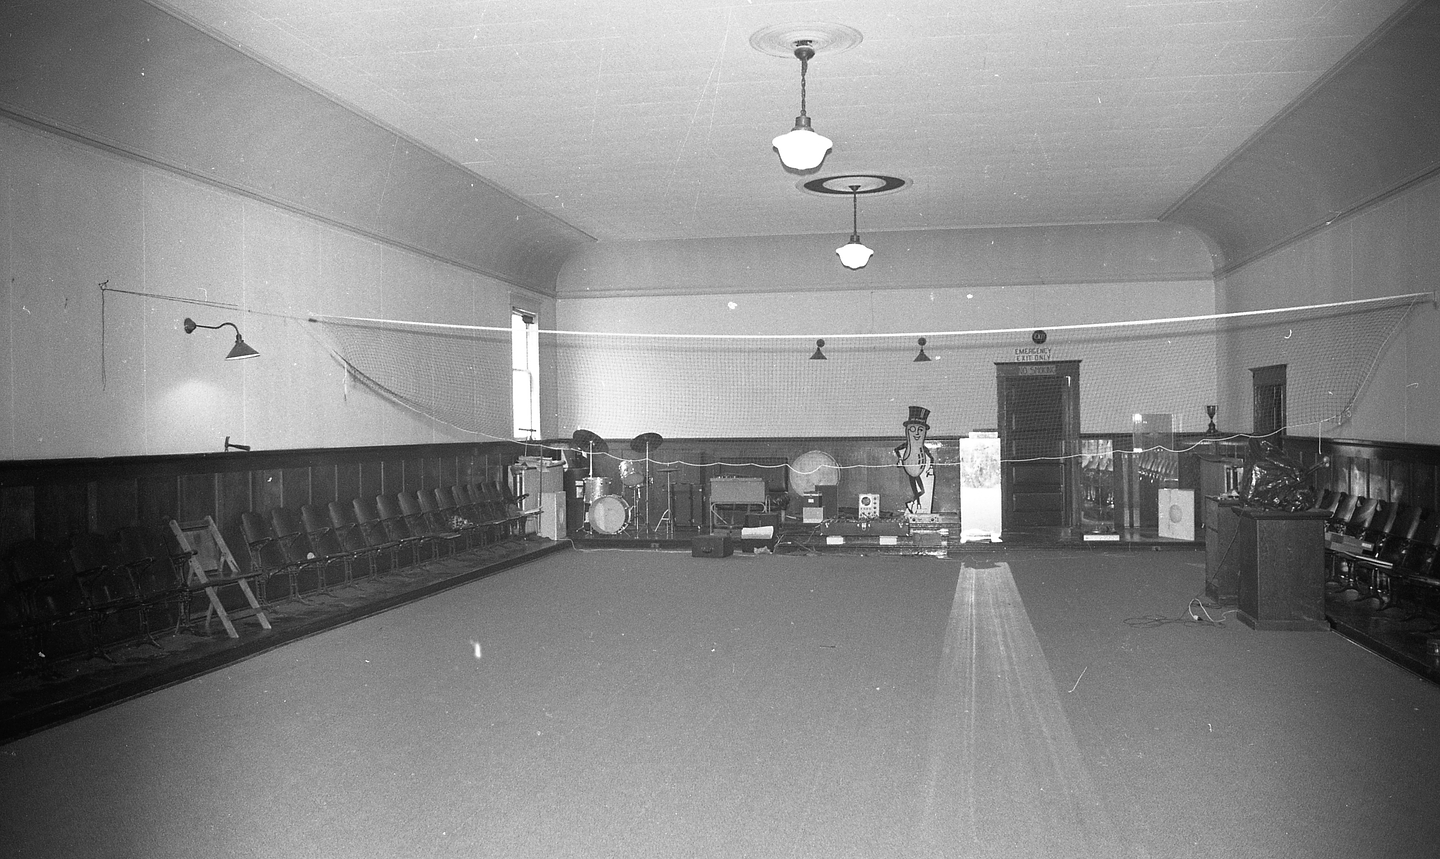 A black and white photo of the interior of Western Front’s Grand Luxe Hall, showing a view of the large room looking toward the back wall. The room is mostly empty apart from some equipment, including a drum set, lecterns, and large cardboard cut-out of Mr. Peanut.